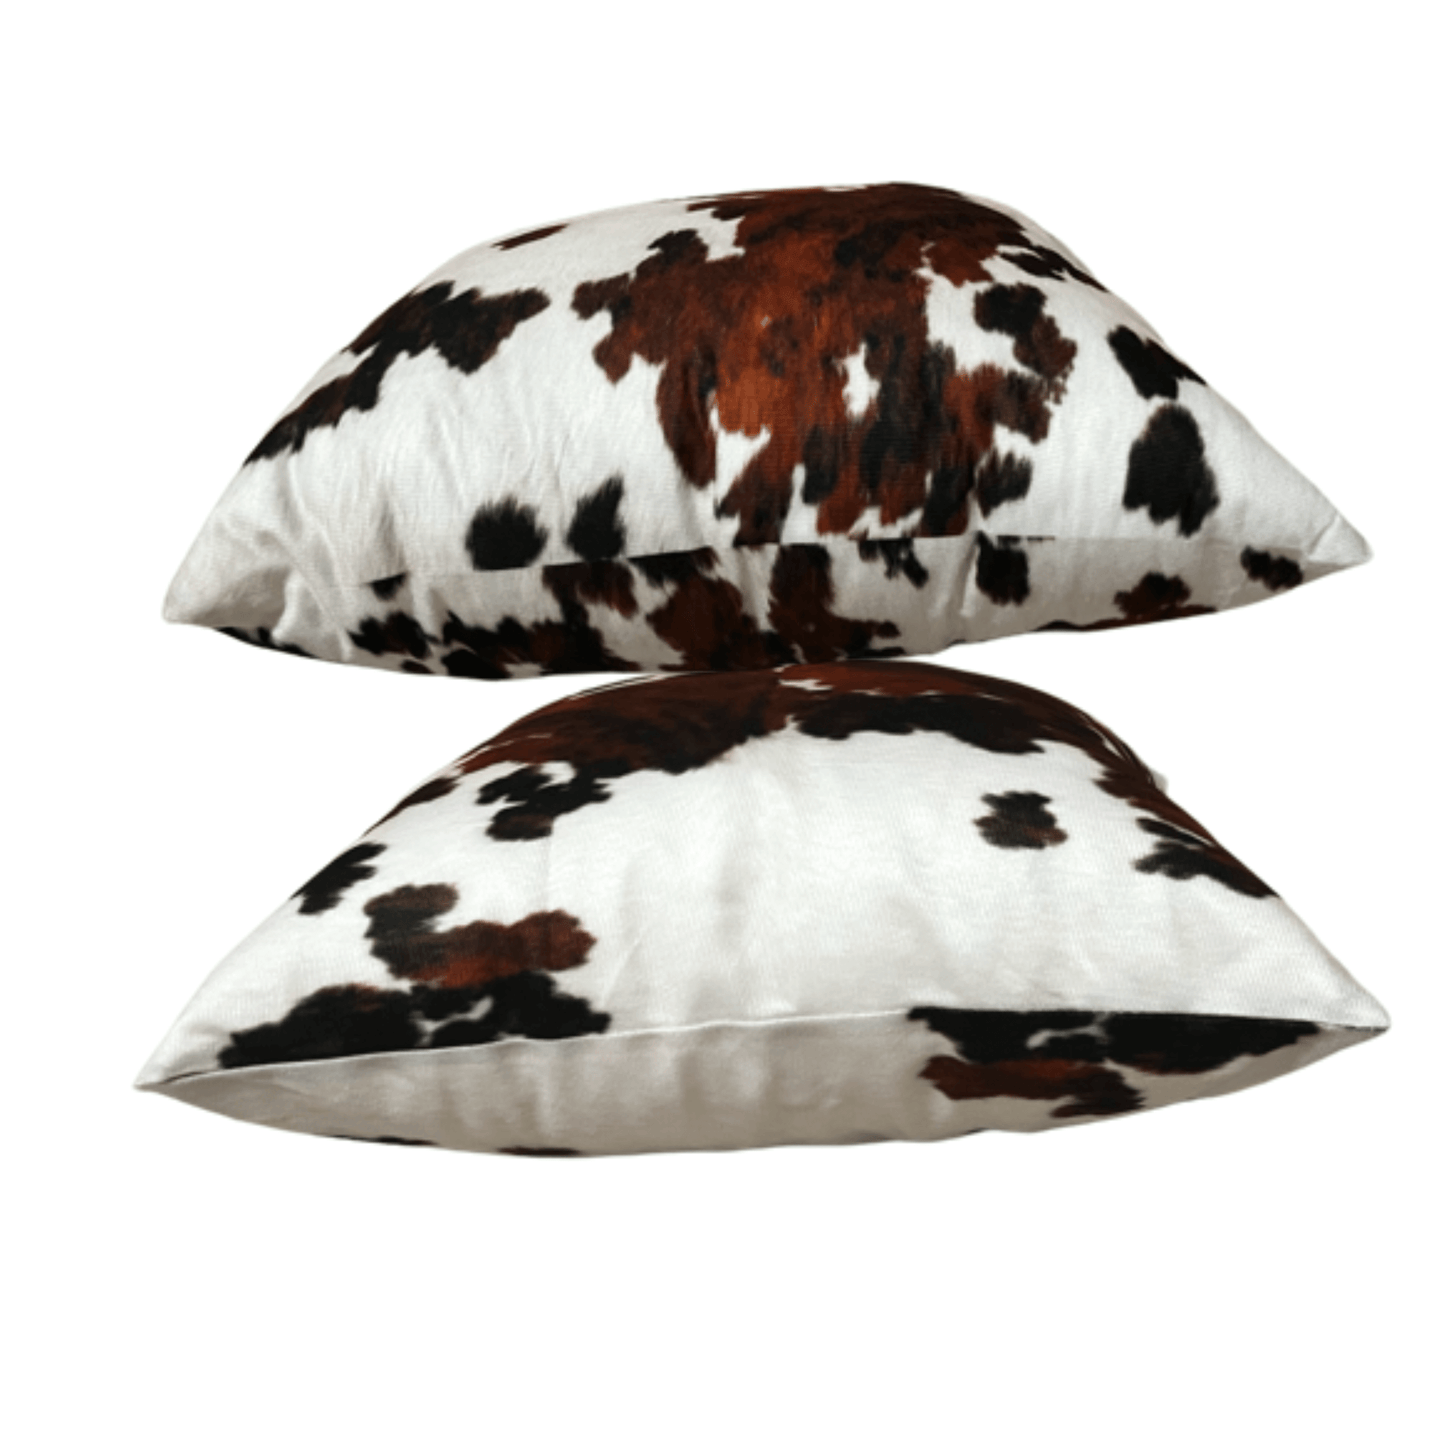 Wholesale Throw Pillow Cover: Faux Cowhide Brown & White Spots Print